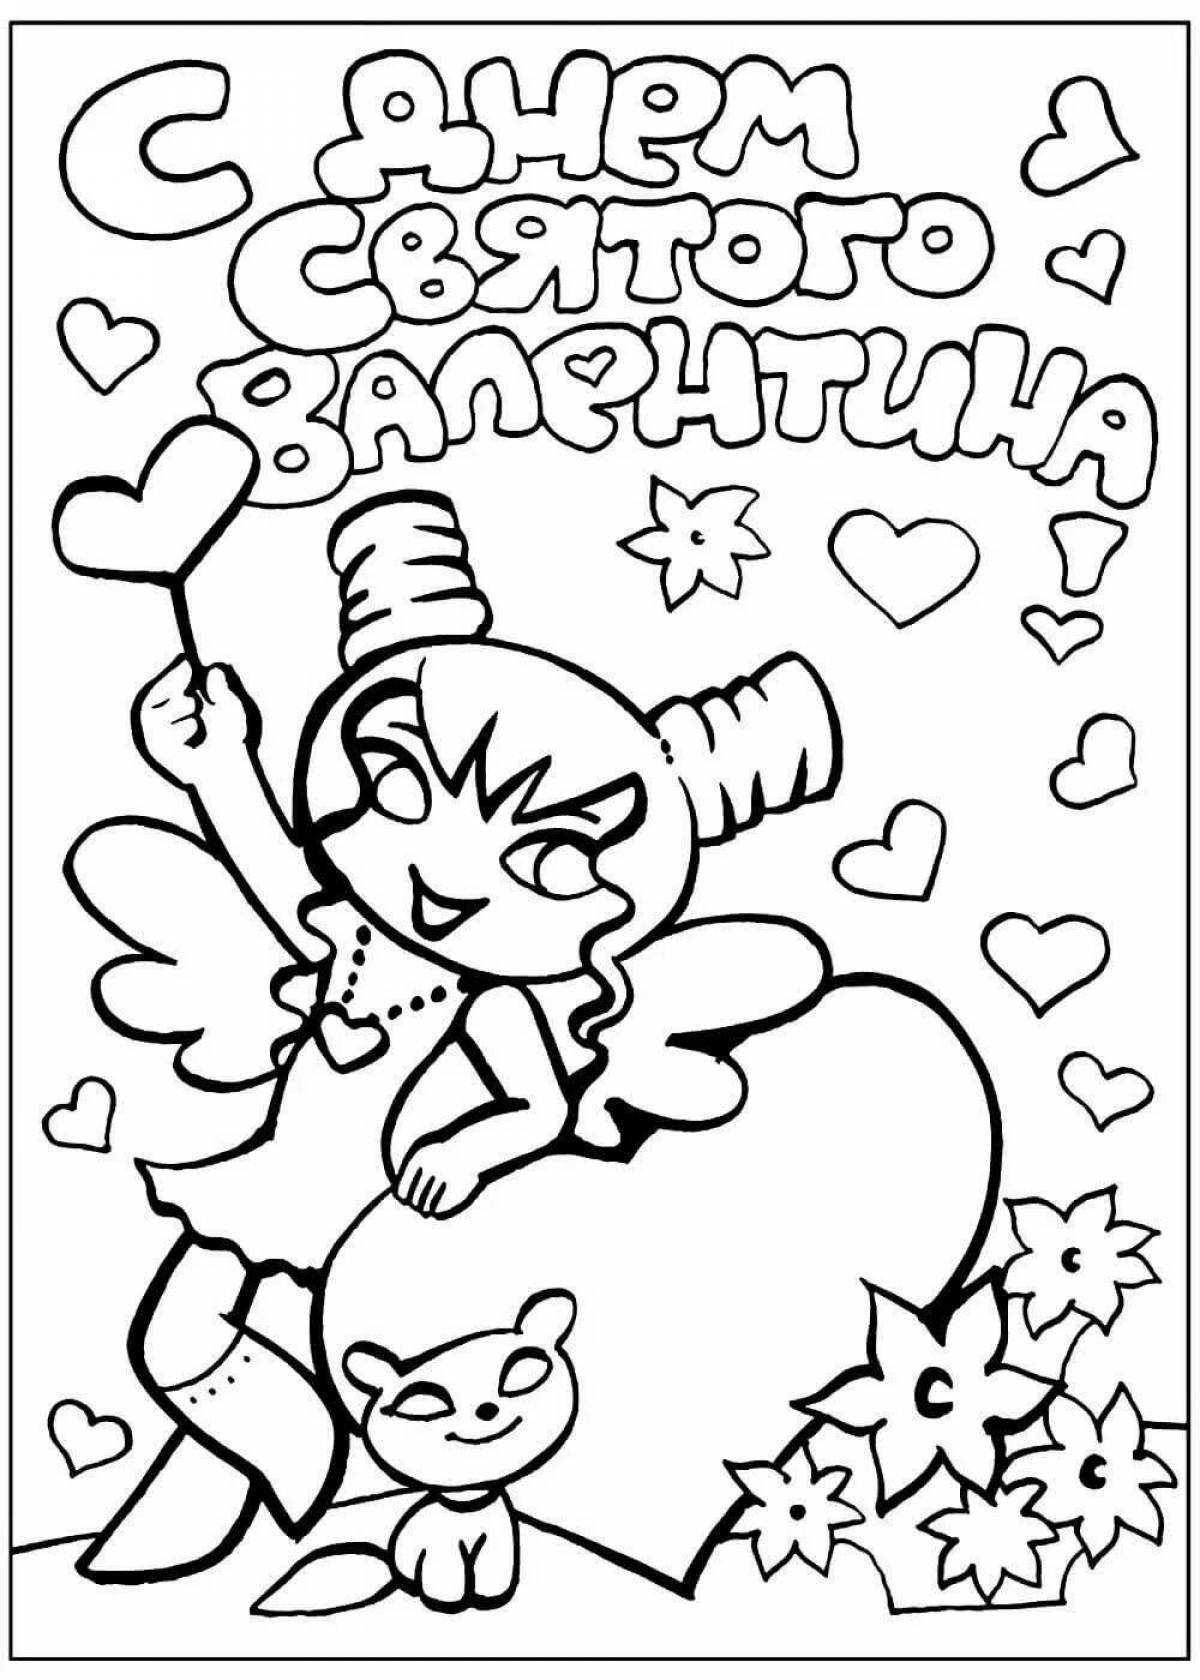 Coloring page wild valentine's day